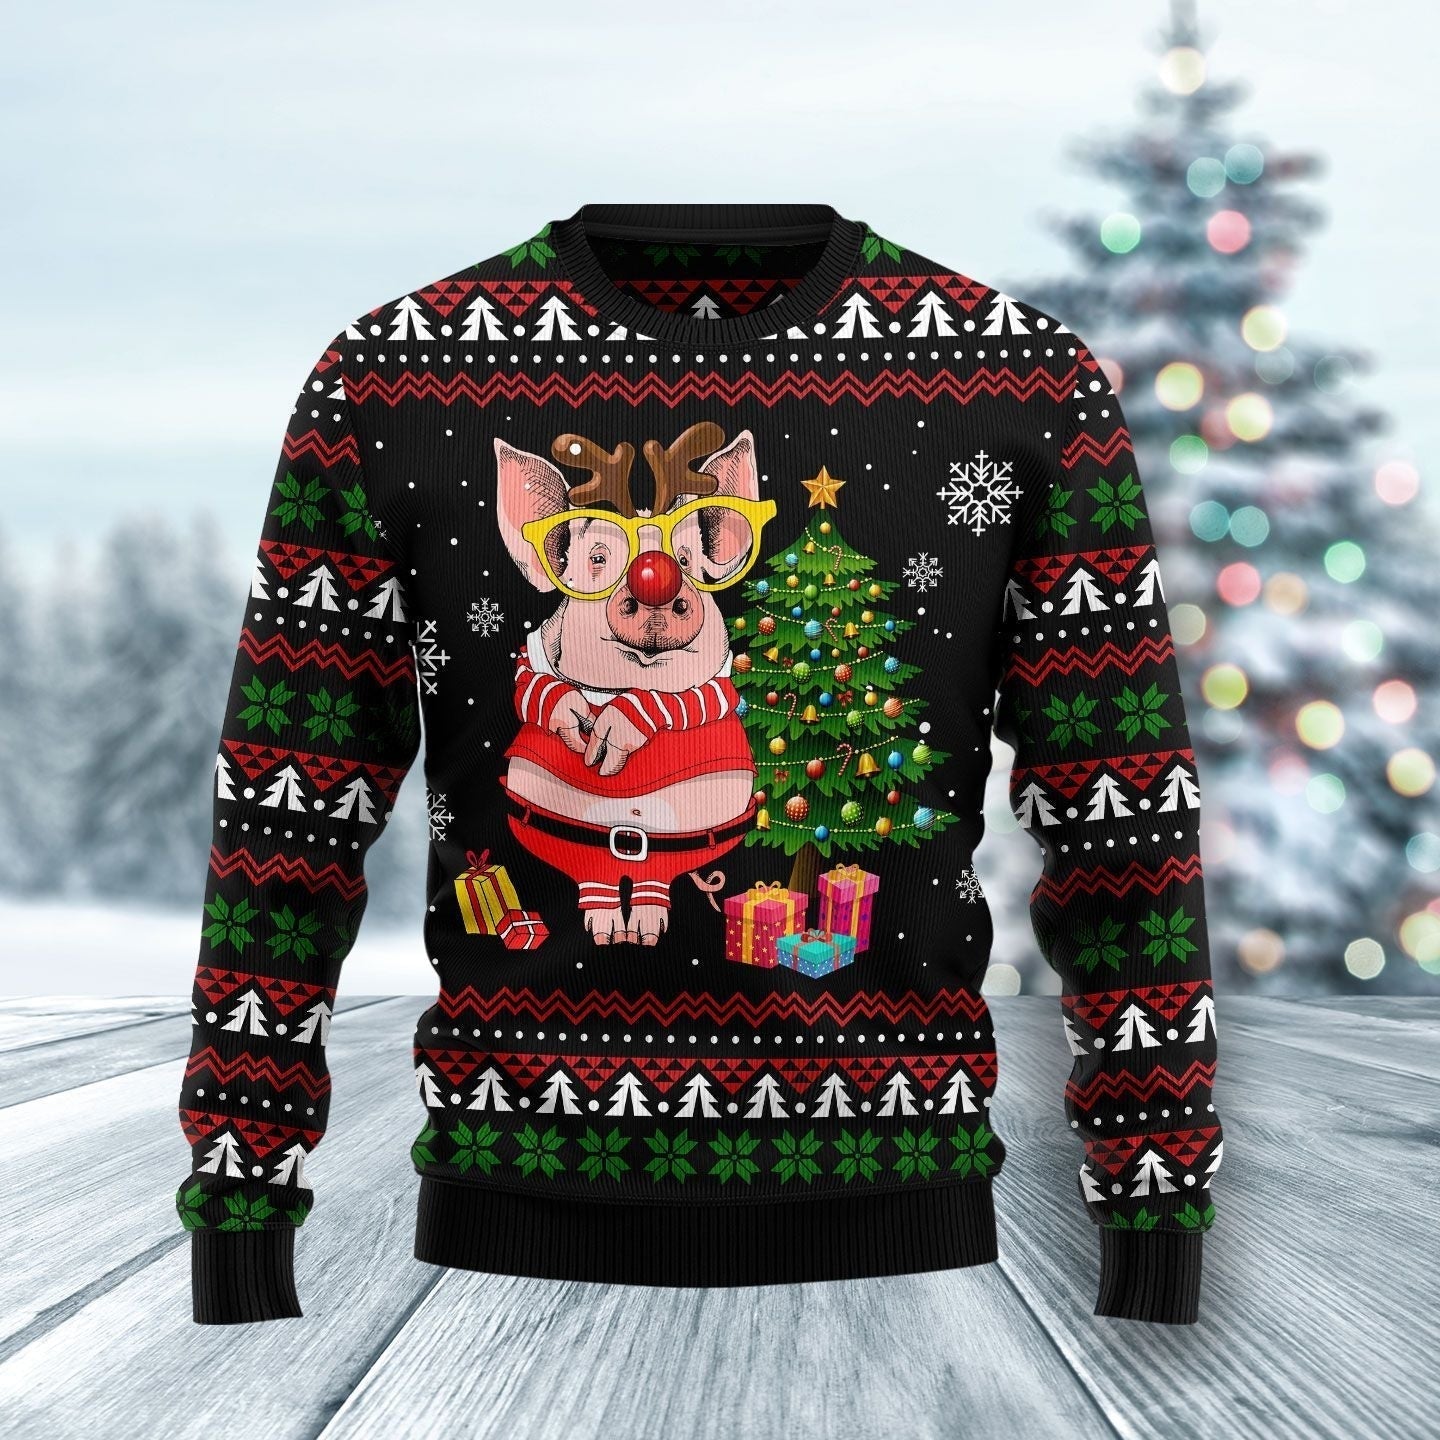 Pig Gorgeous Reindeer Ugly Christmas Sweater, Perfect Outfit For Christmas, Winter, New Year Of Pig Lovers